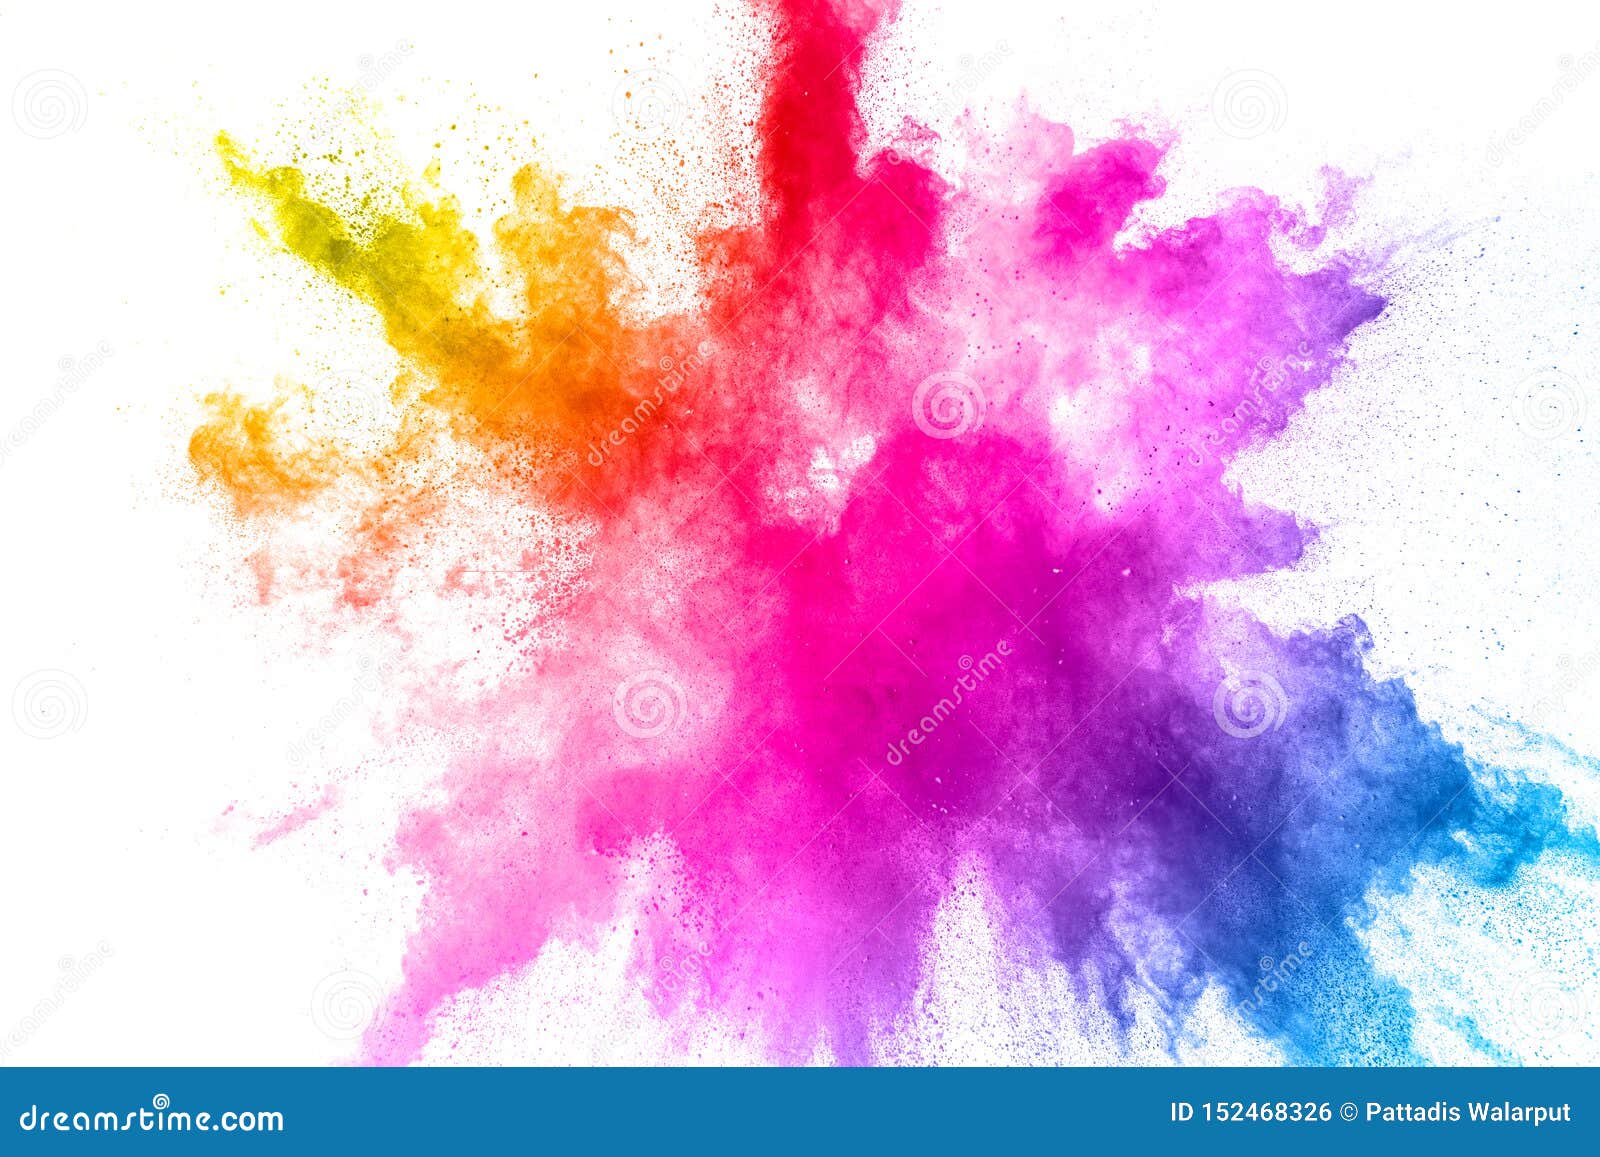 690,911 Background Splash Stock Photos - Free & Royalty-Free Stock Photos  from Dreamstime